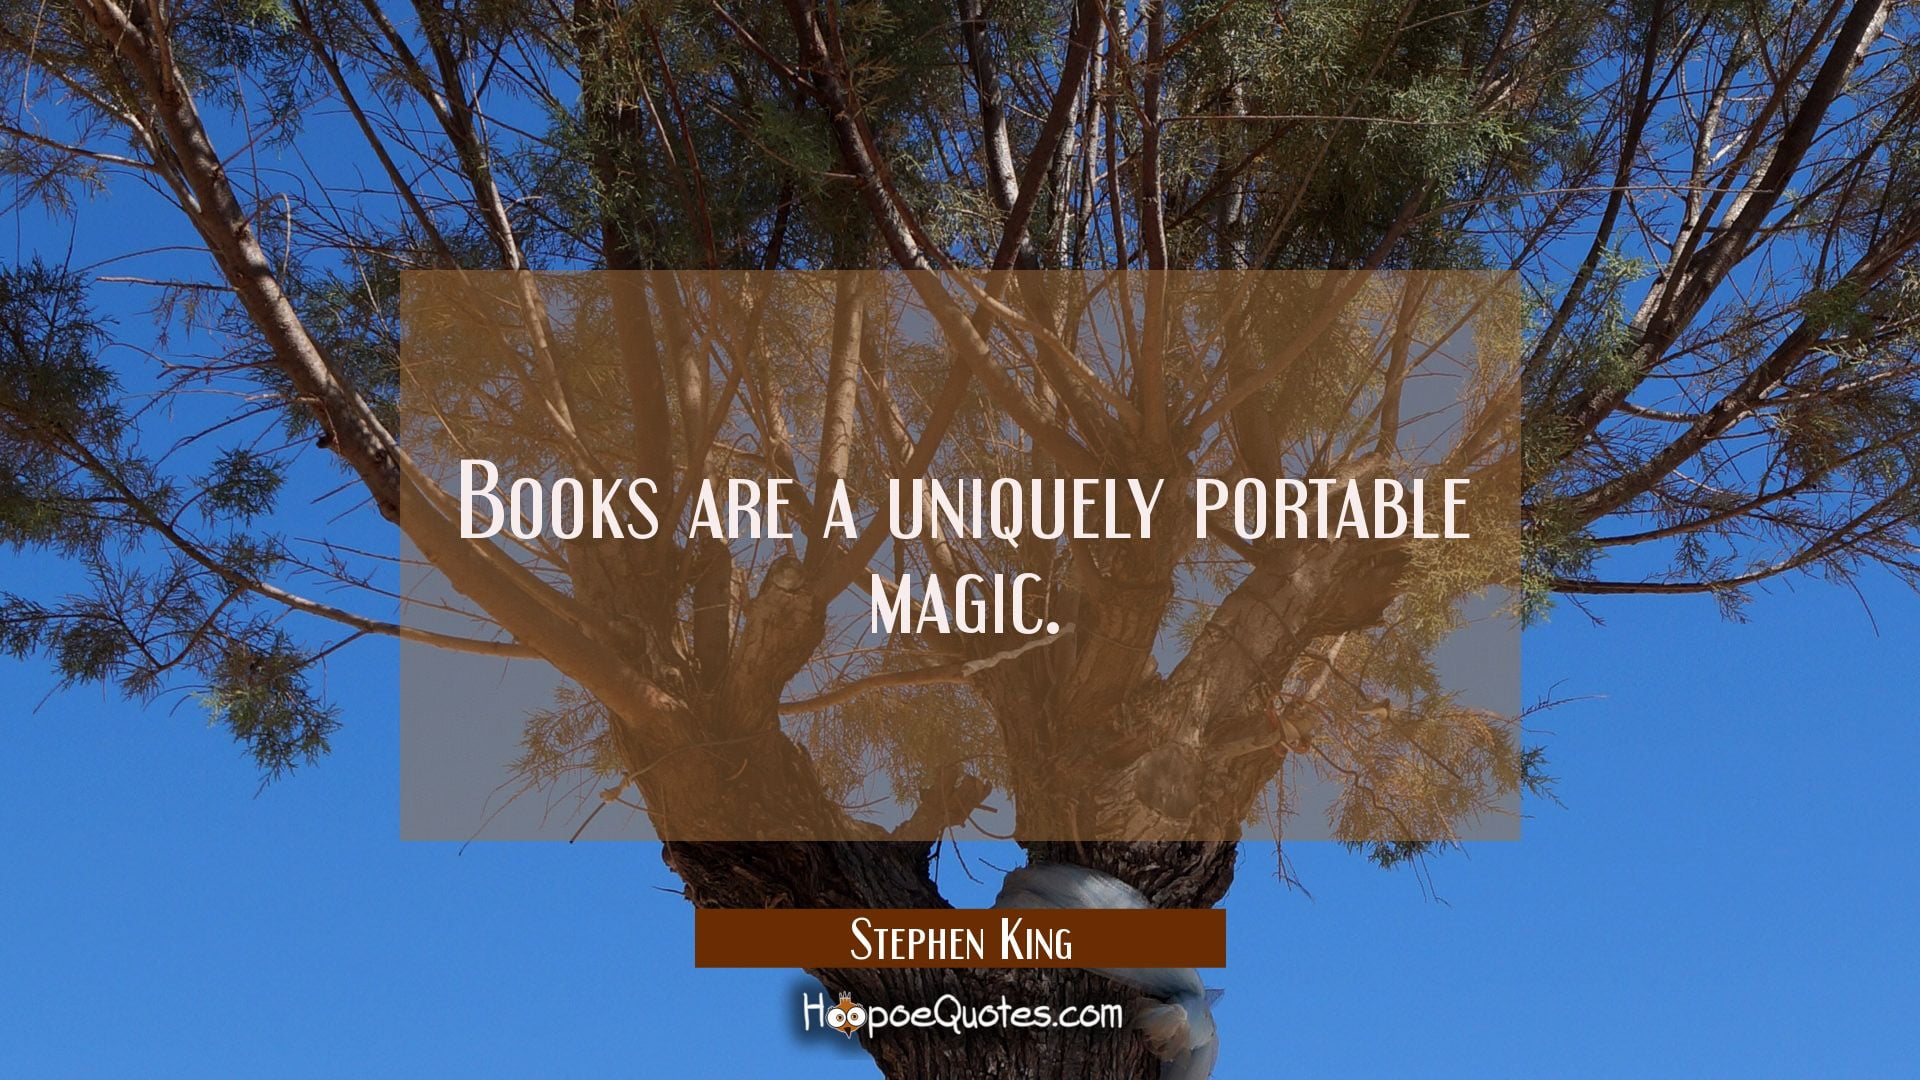 books, quote, Stephen King, magic, text, communication, tree